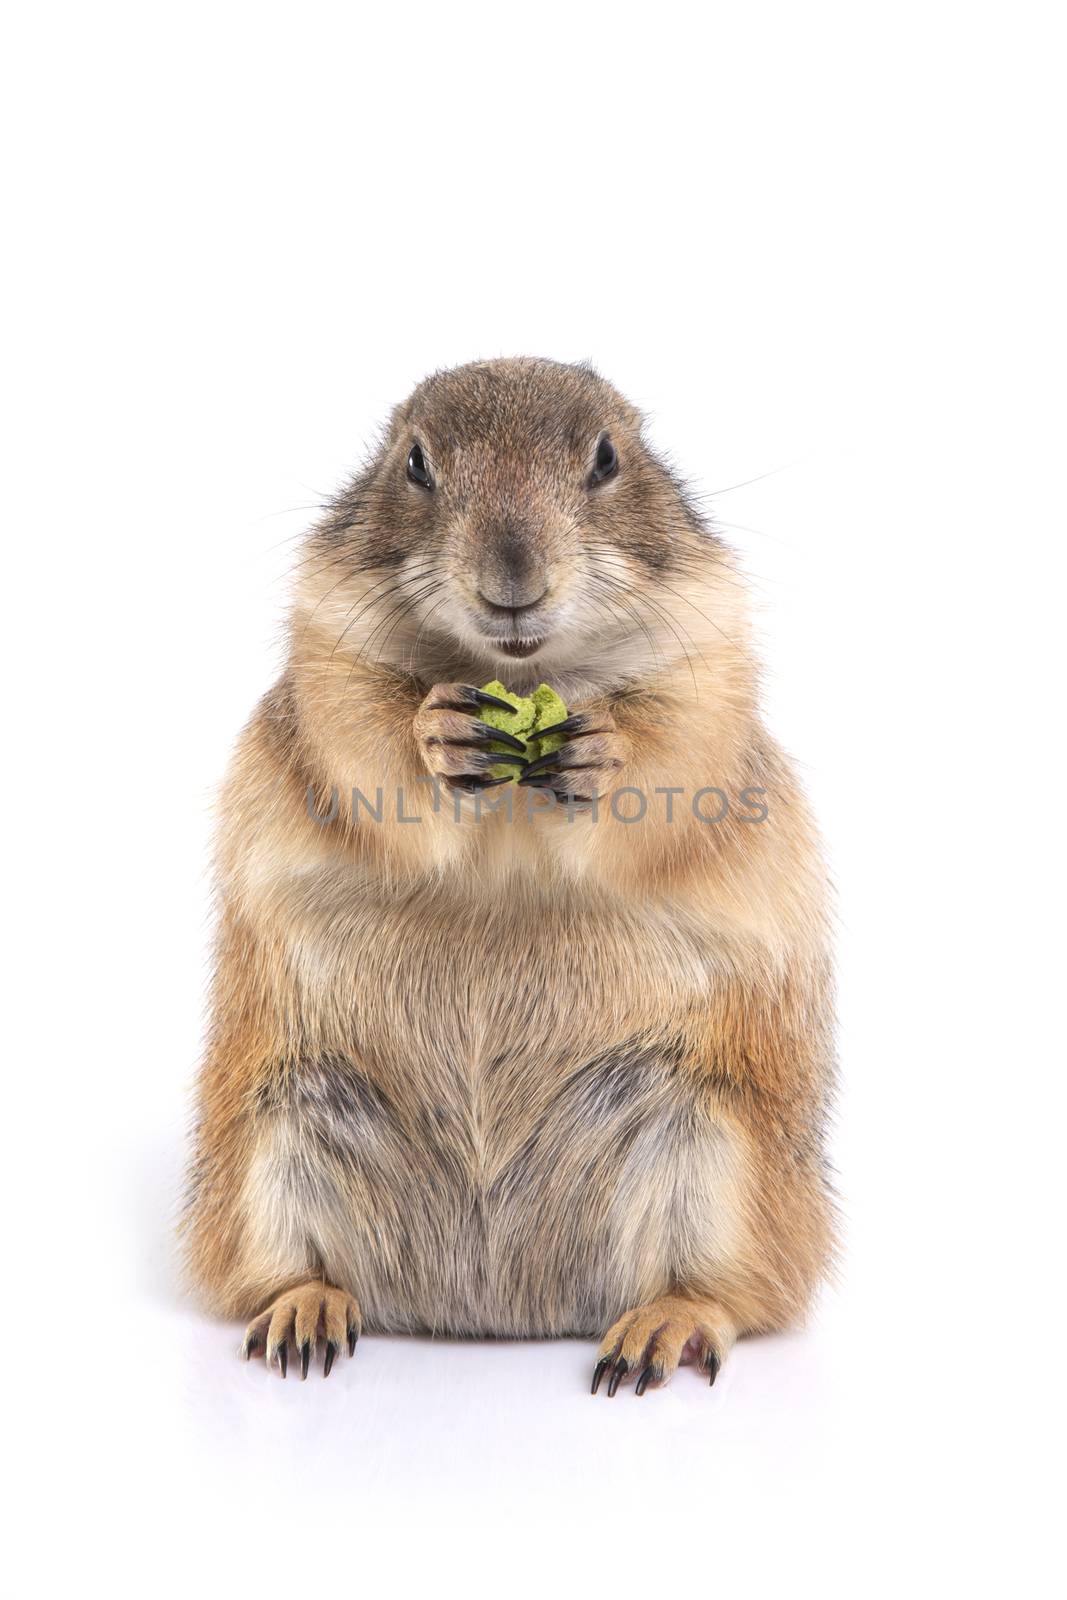 Prairie dog holding green snack in hands and enjoy eating on white background.